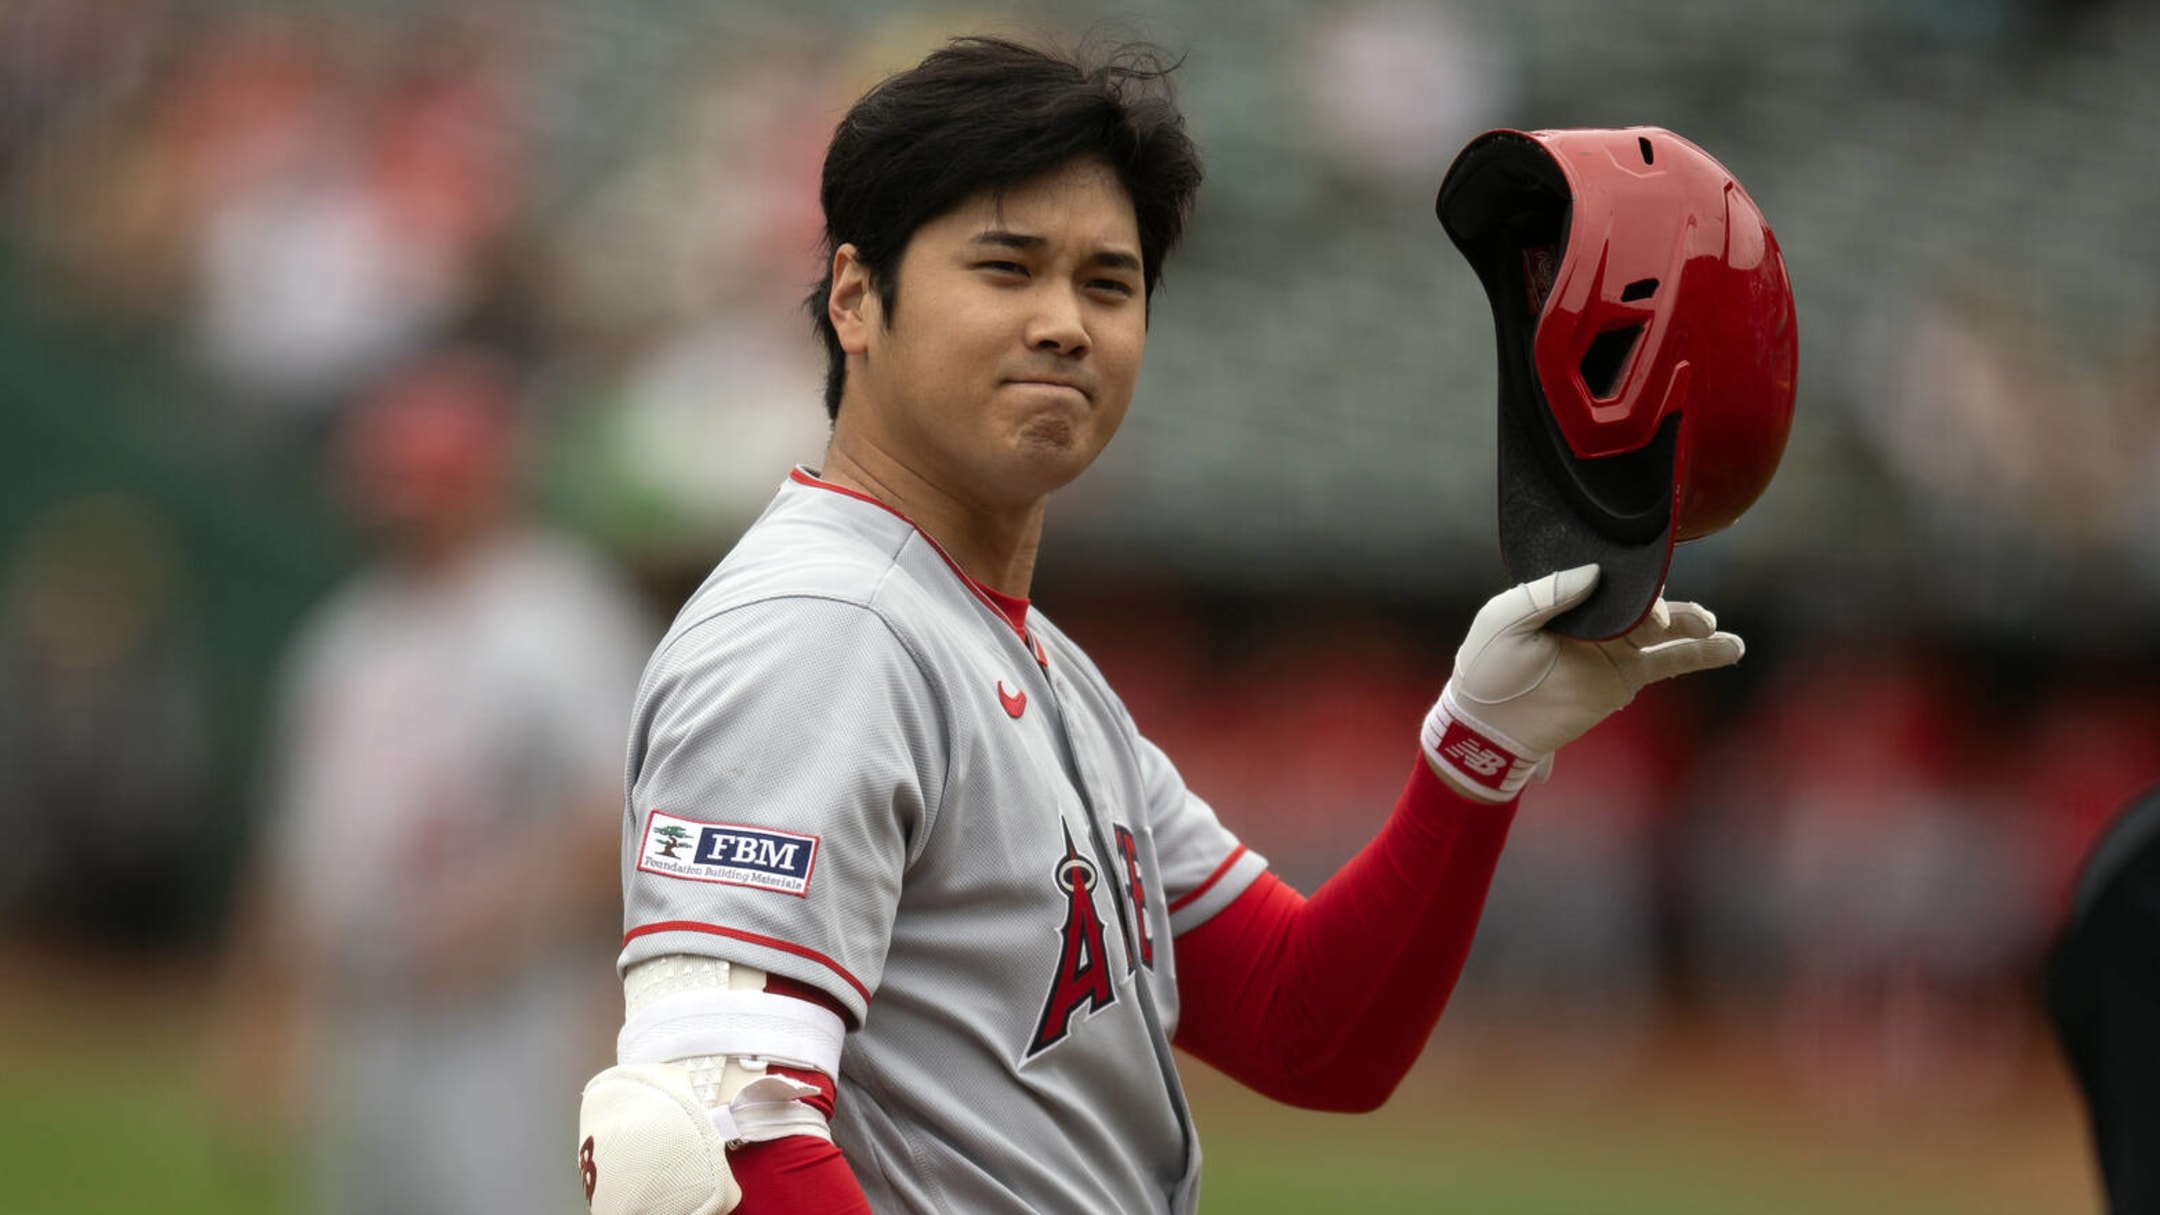 Insider reveals 'primary consideration' for Ohtani in free agency